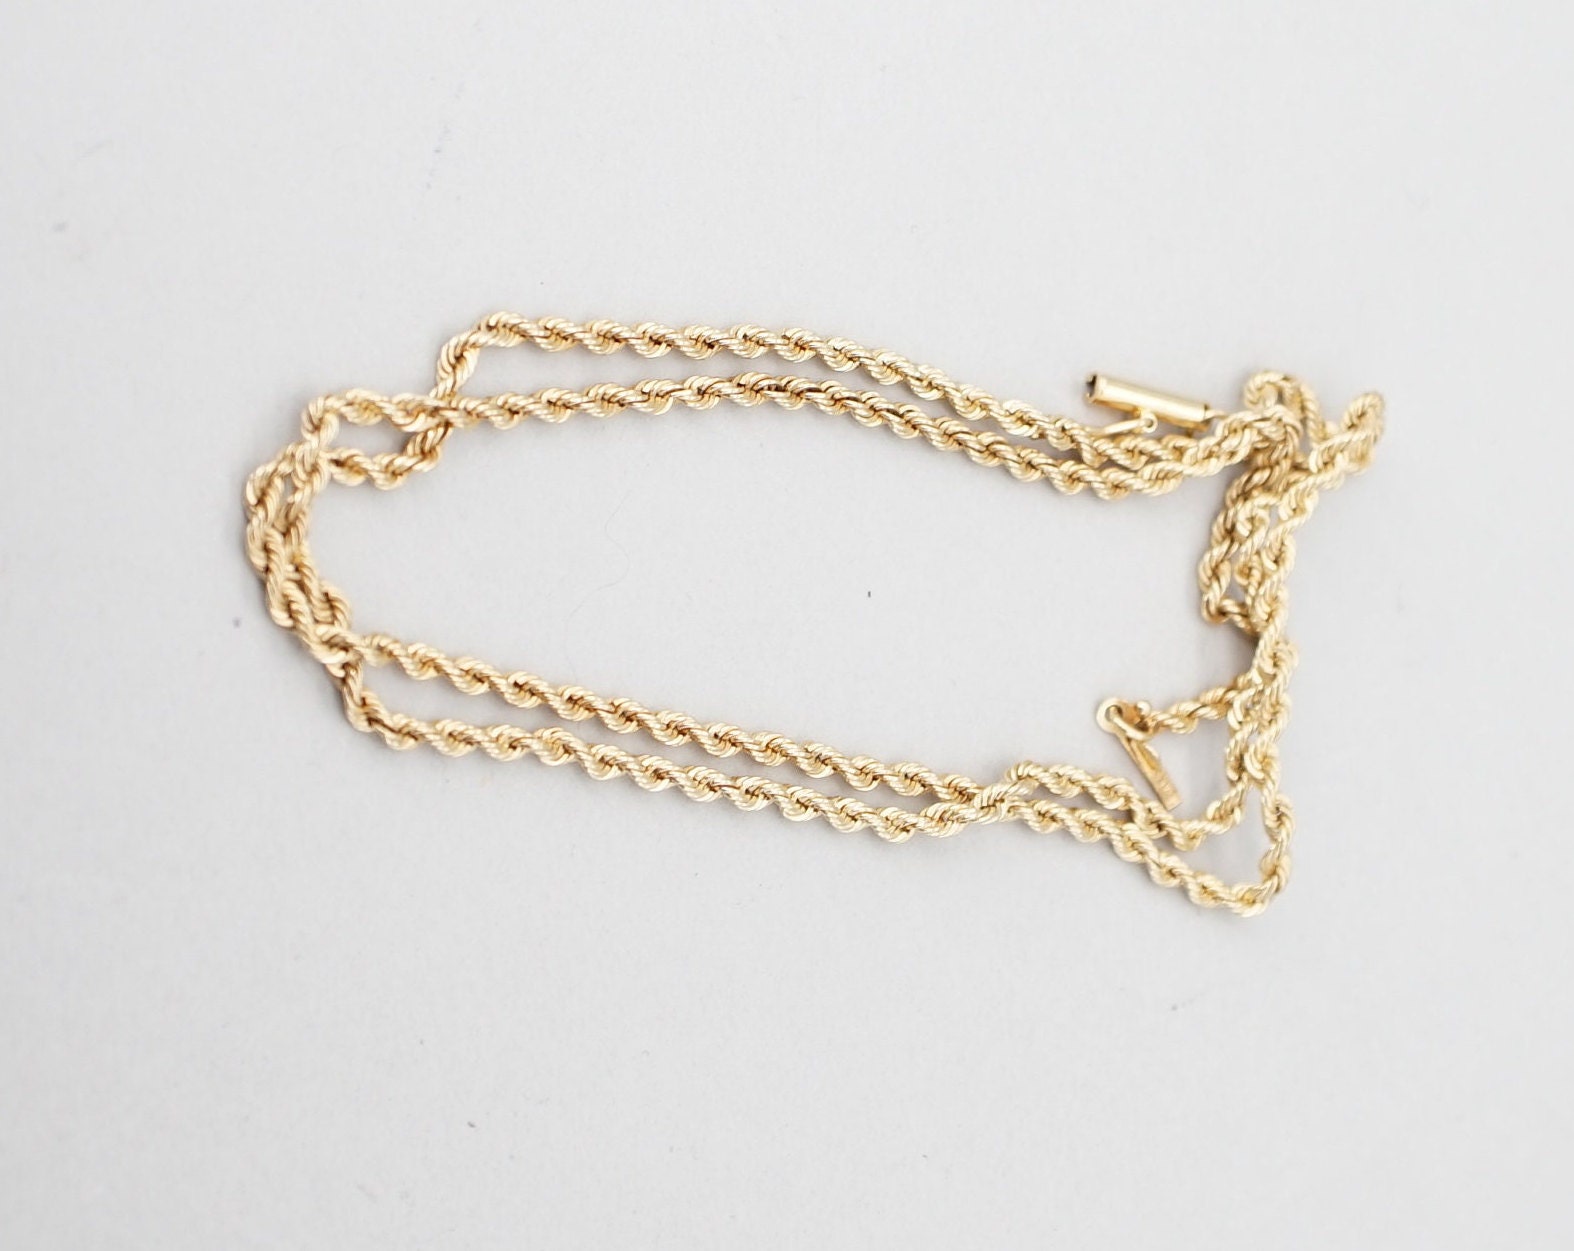 14k Gold Rope Chain, Sailor Lock Clasp Necklace  5mm Straw Mesh Gold  Chain, Reversible 2 in 1 Necklace, Add Charm to Clasp, Gift for Her